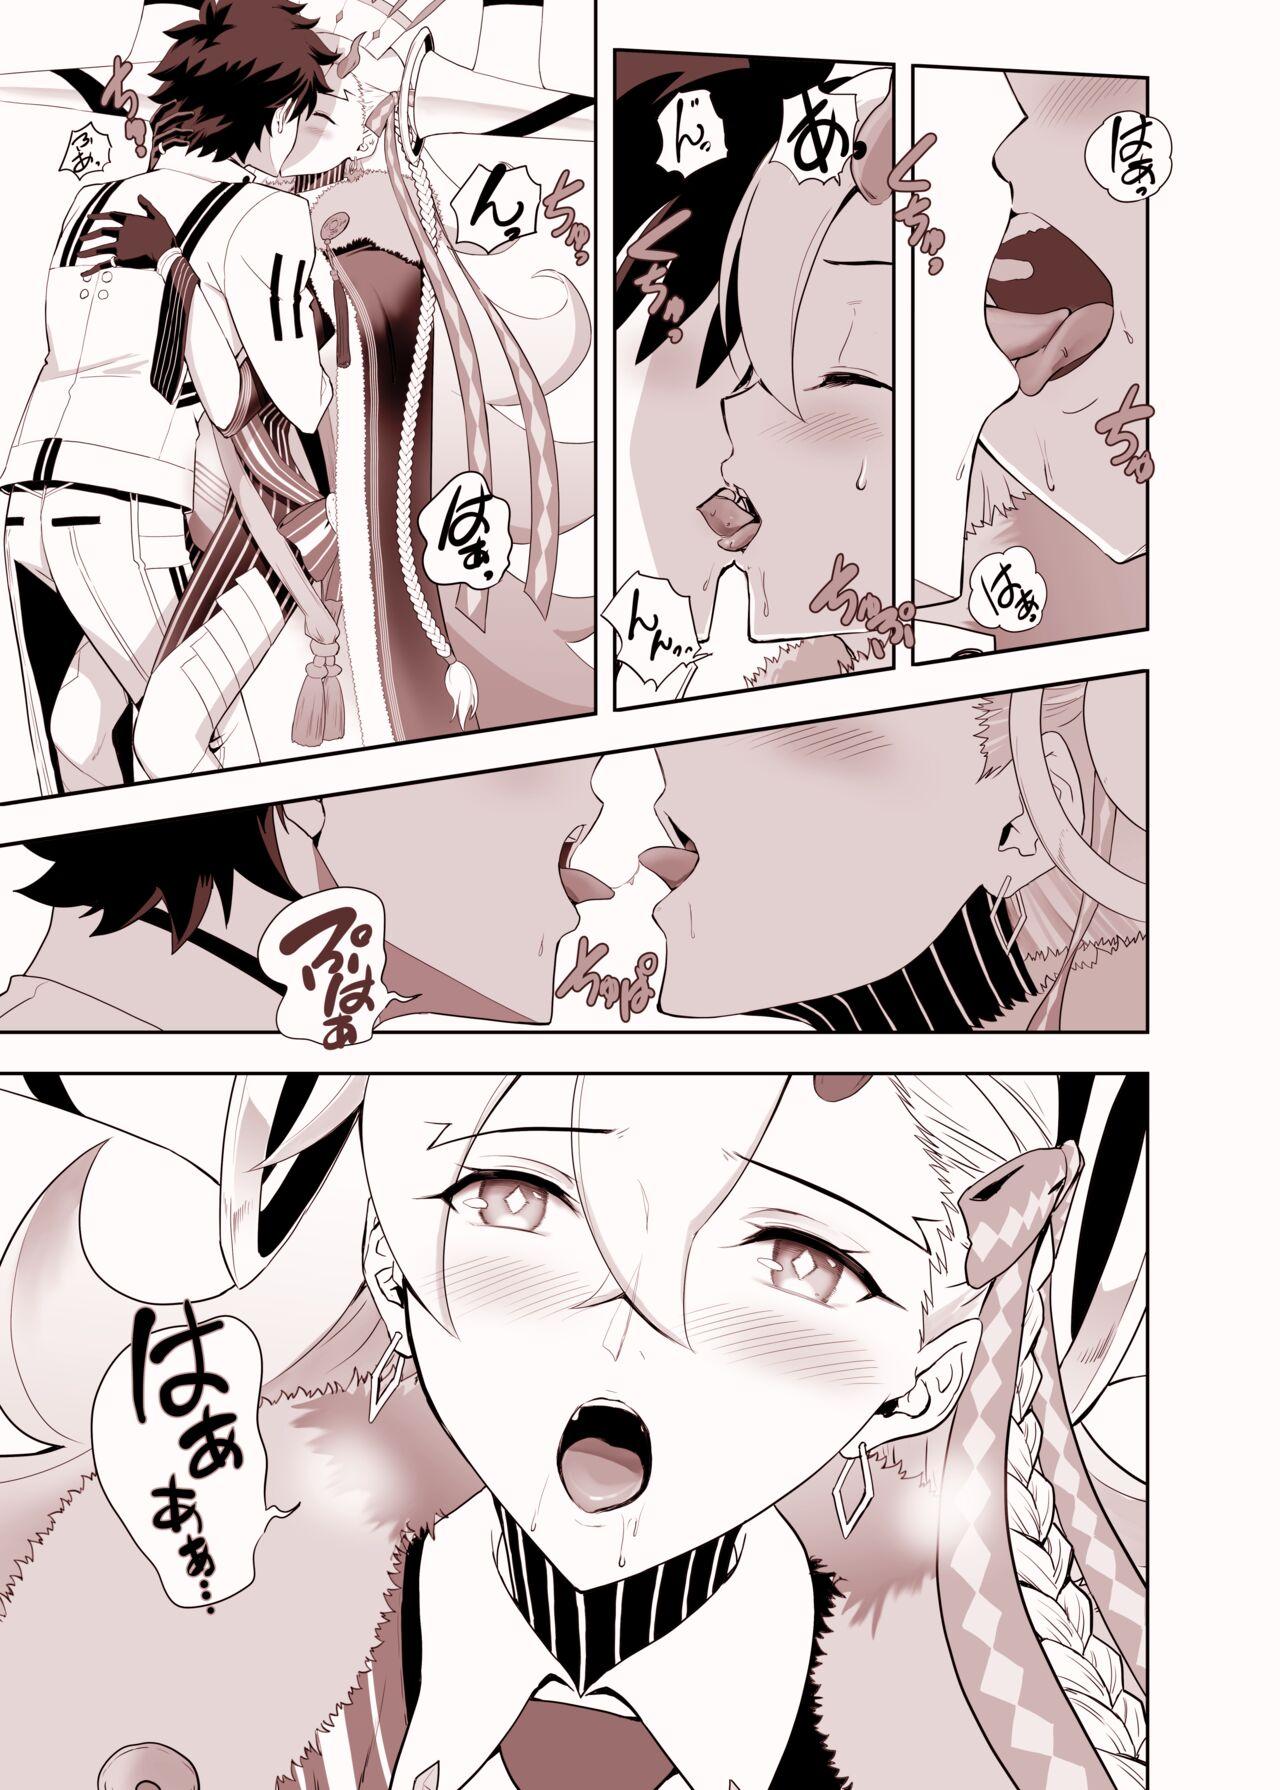 Bound Lovely U - Fate grand order Fleshlight - Page 5